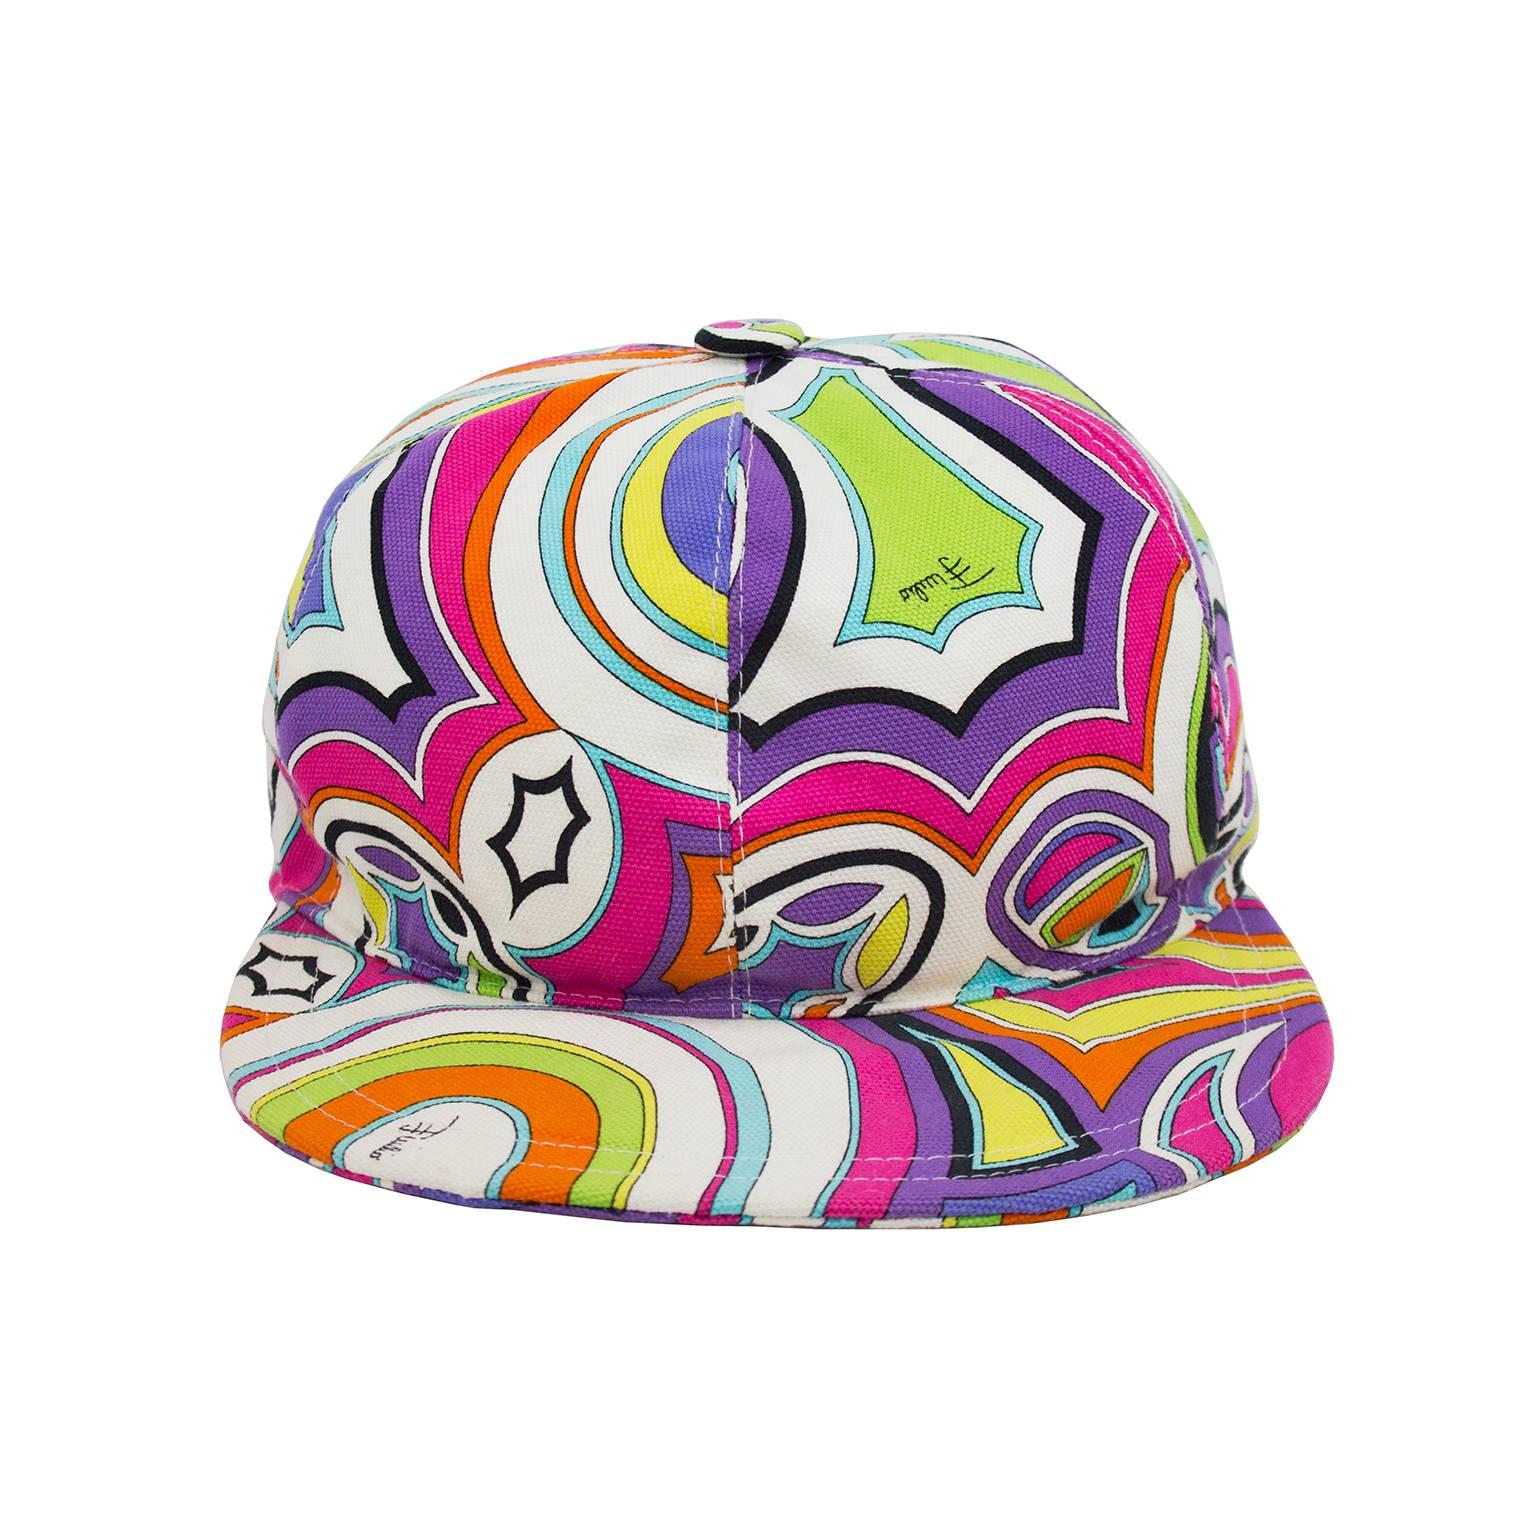 Funky Emilio Pucci printed cotton six panel baseball cap from the 1990s. Classic and iconic abstract, colourful and signed Pucci fabric. Oversized beak. Elasticized in the back. Excellent vintage condition. 23" diameter. 